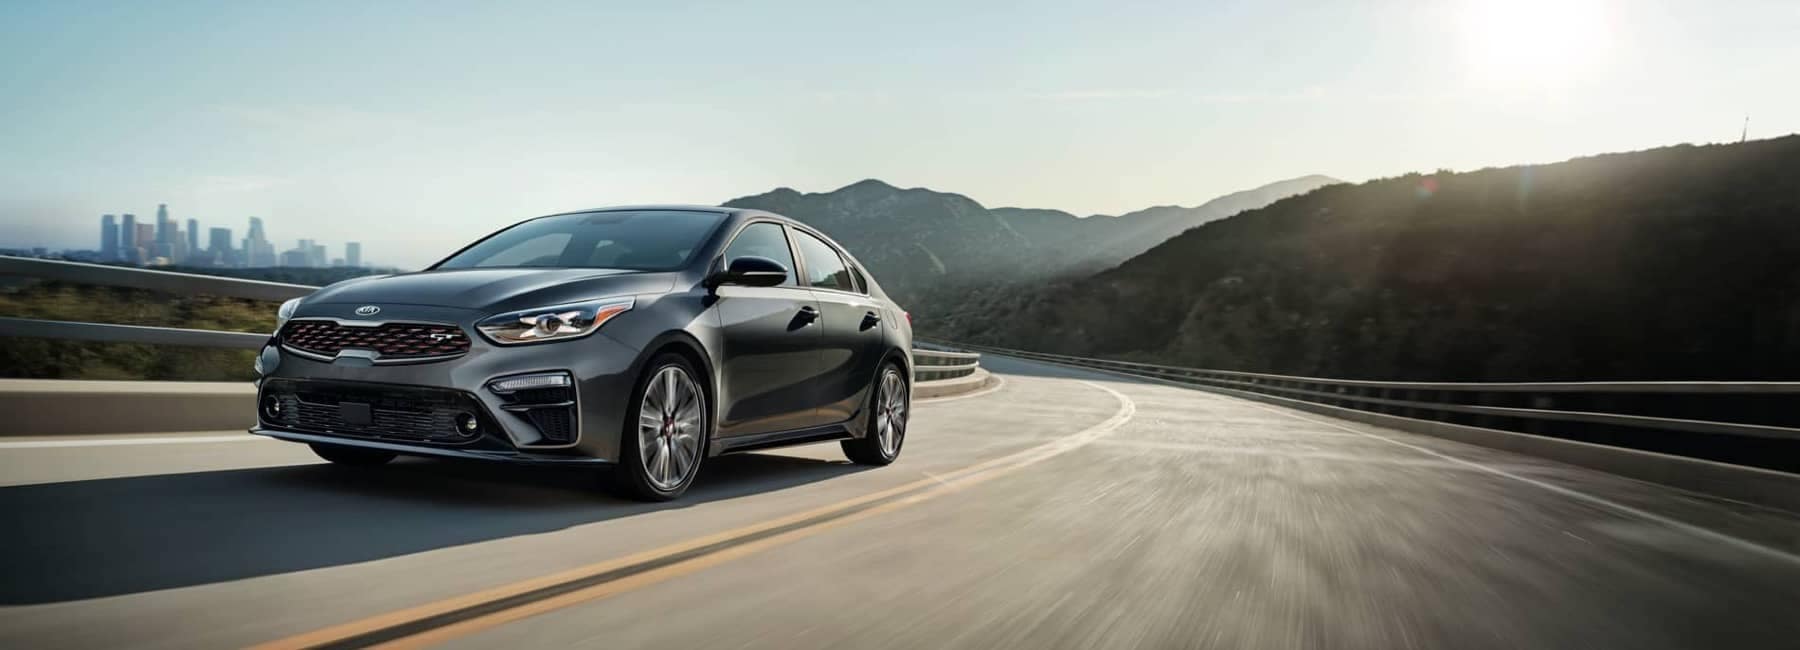 2020 Kia Forte driving on a road